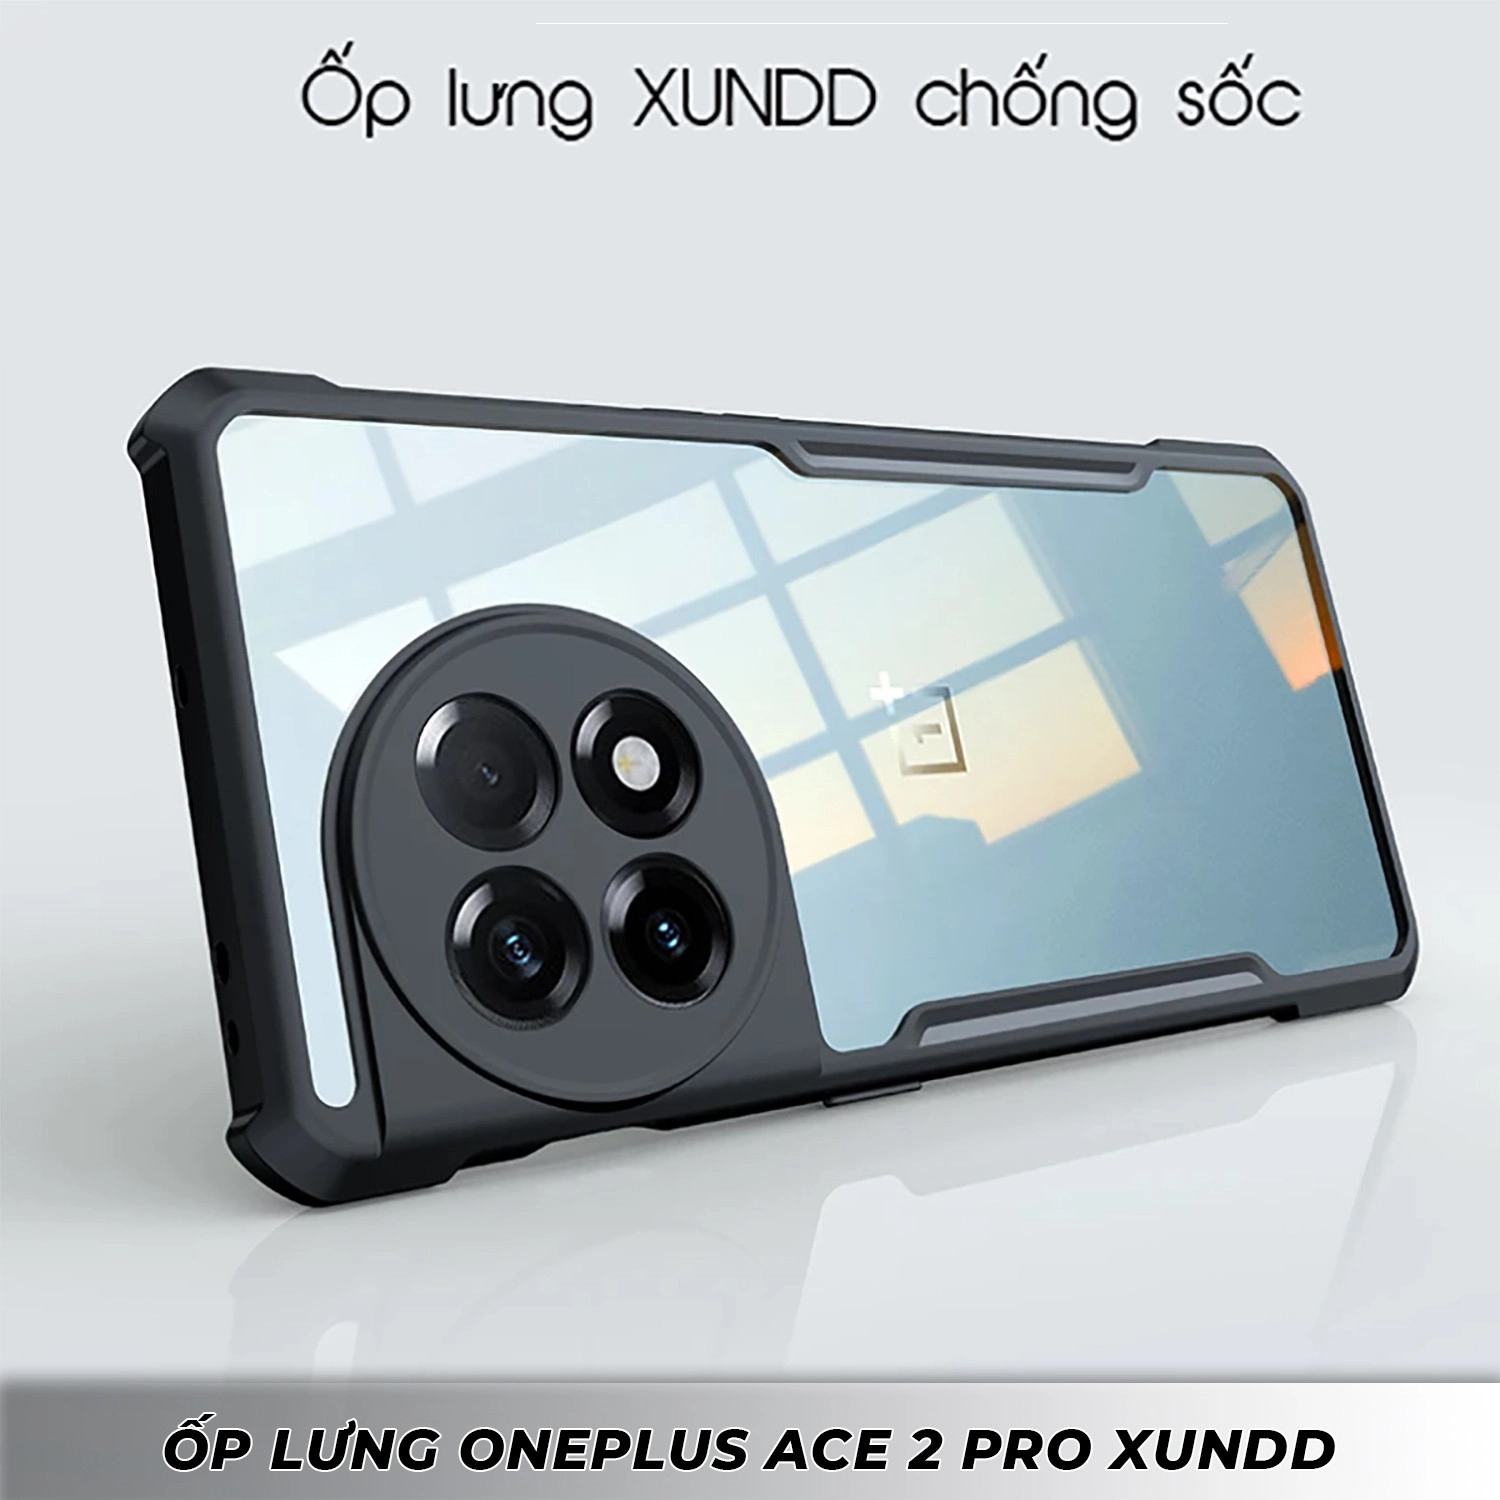 op-lung-oneplus-ace-2-pro-xundd